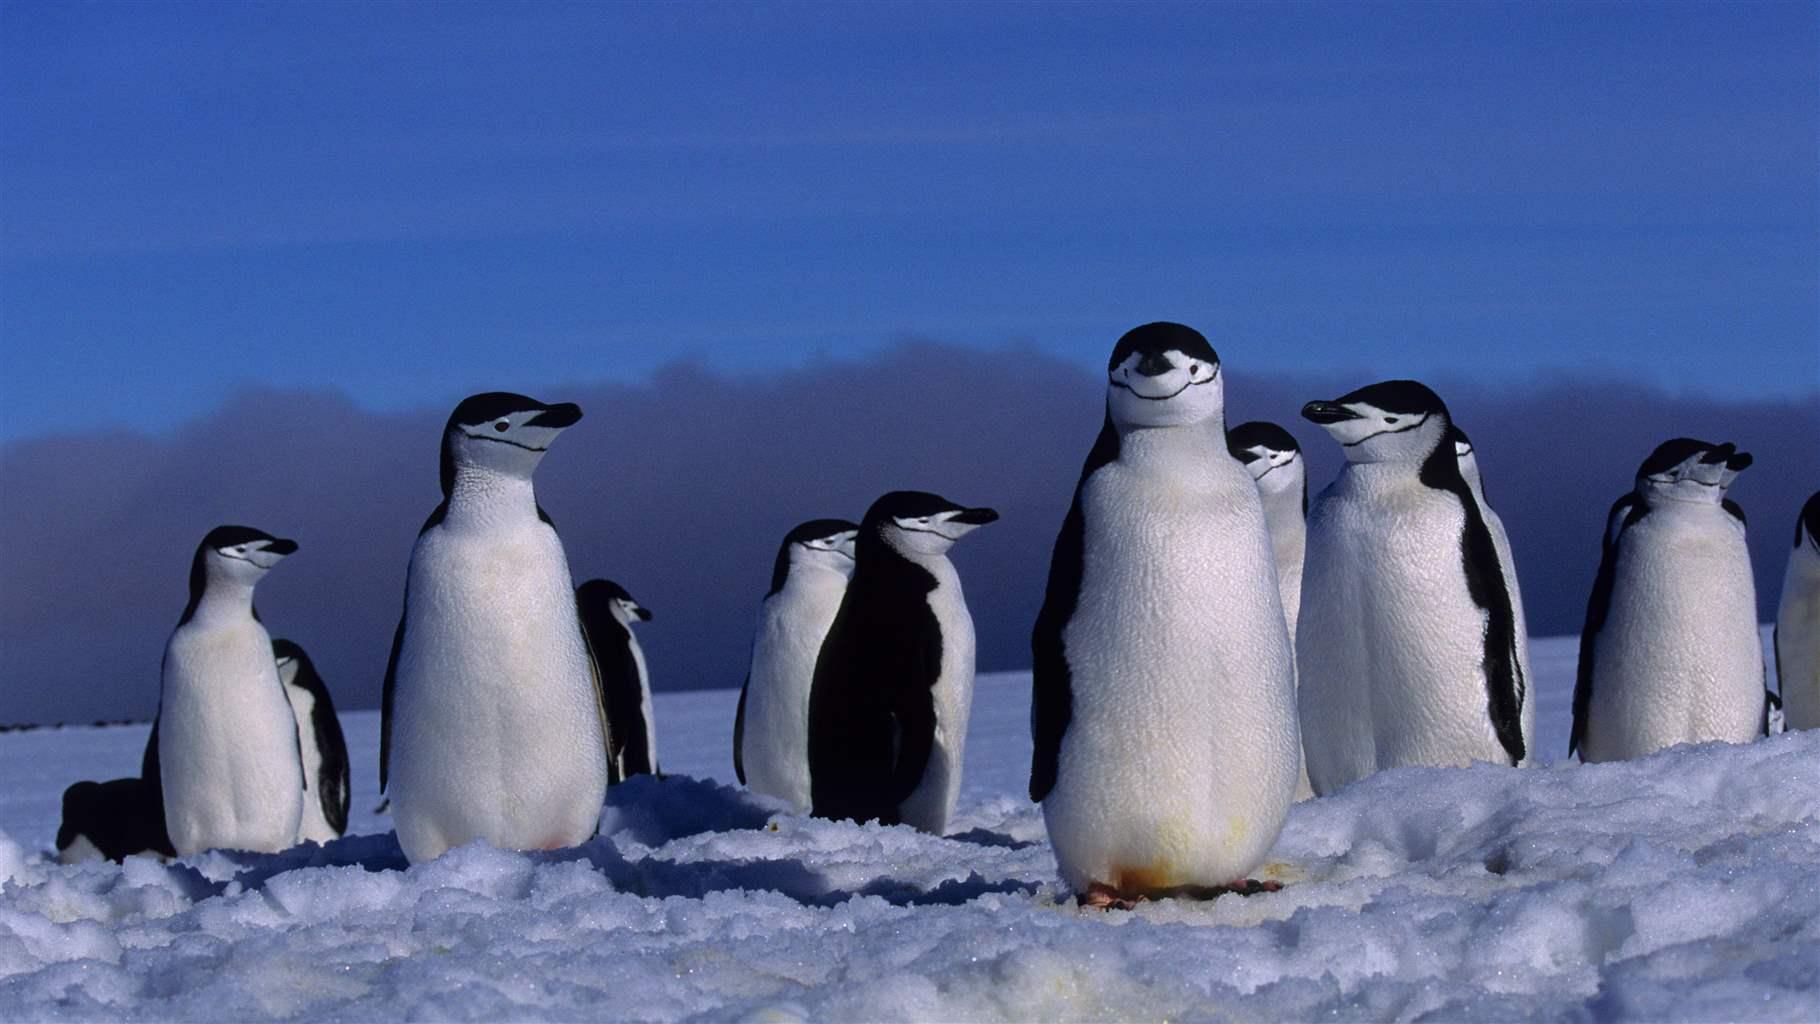 Chinstrap penguins (Pygoscelis antarcticus) at their nest sites which are still covered with snow in early spring on Zavodovski Island in the South Sa